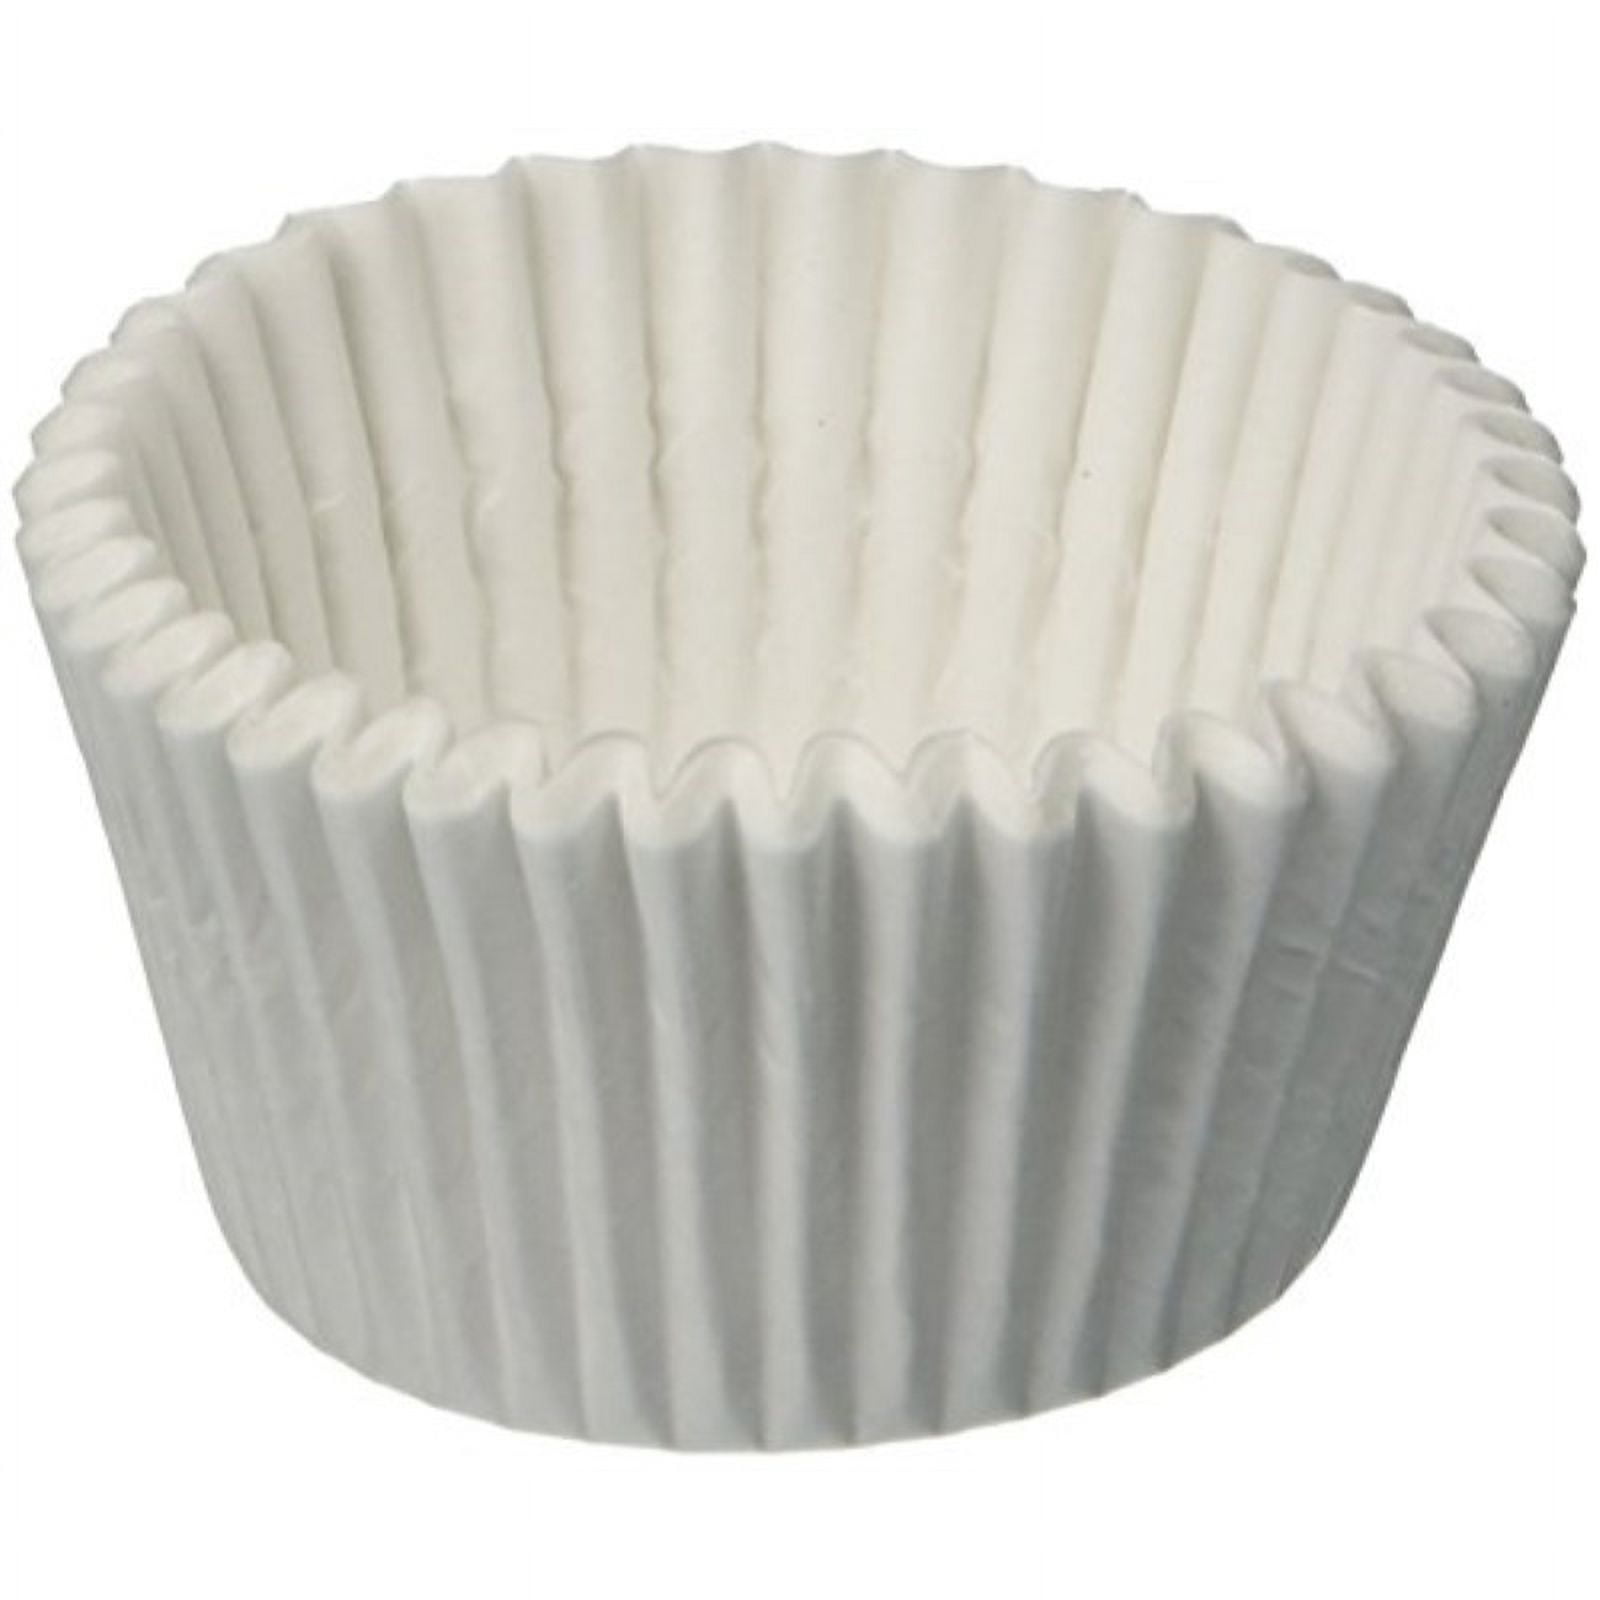 Fc1875x450 Baking Cup, 3.5 In. Case Of 10000